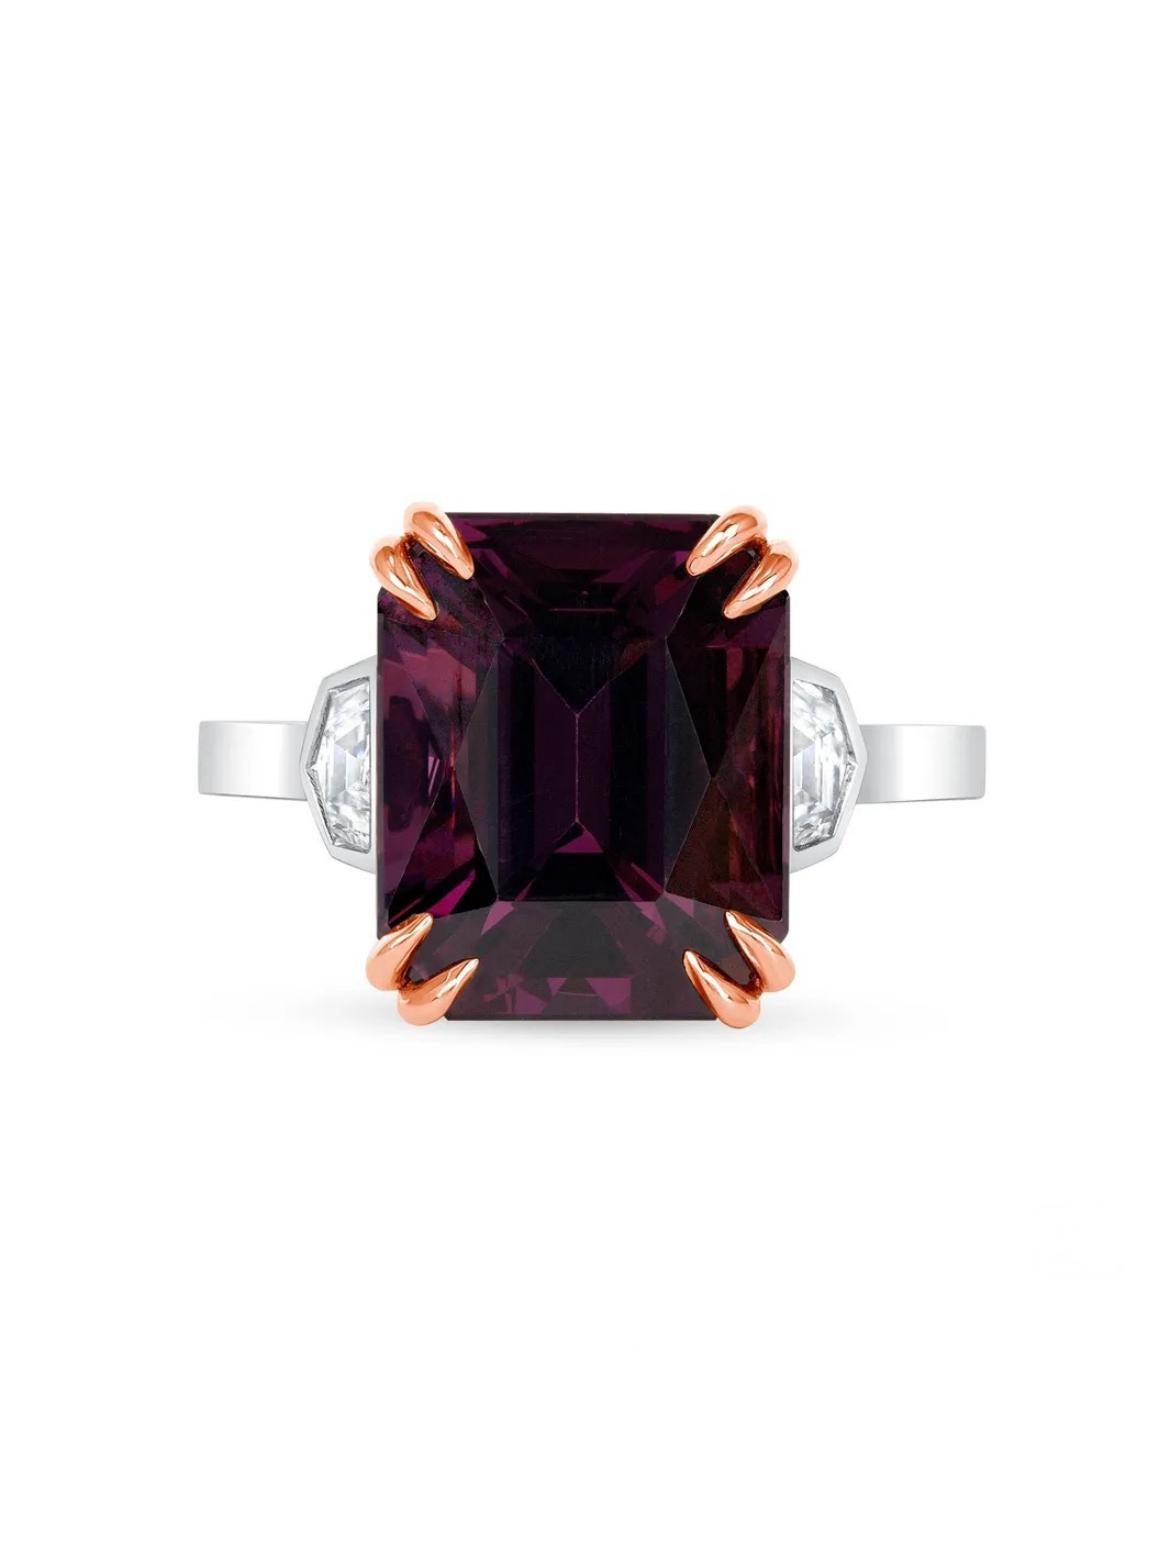 Modern 7.39ct untreated emerald-cut purple Spinel ring. GIA certified.  For Sale